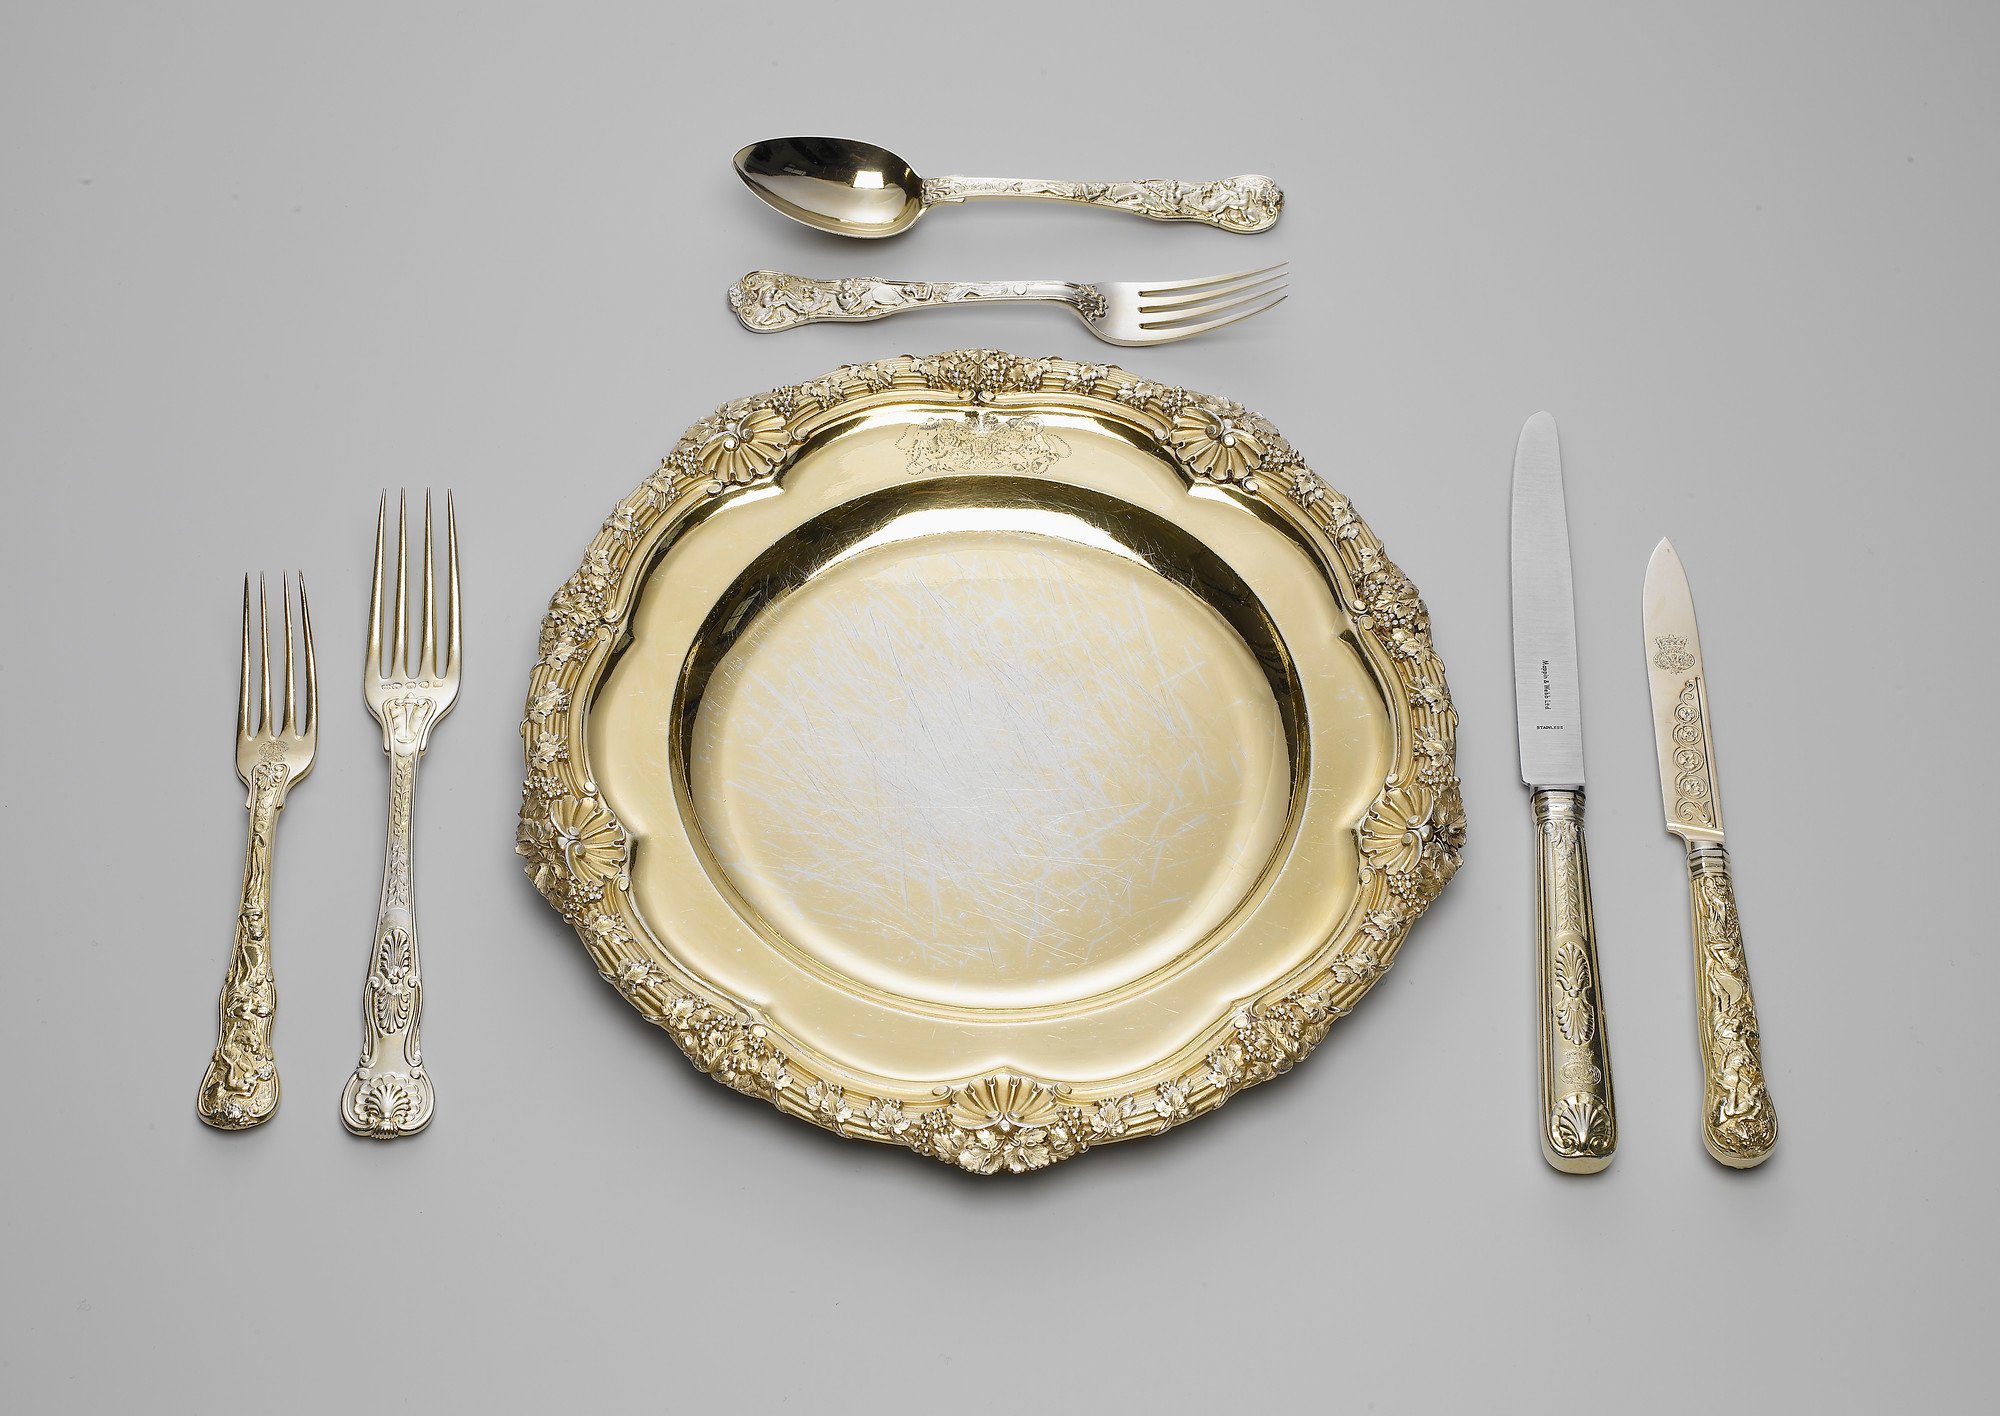 A set of silver-gilt plates; the reeded rim cast with fruiting vines and scallop shells. The plate is engraved with the Royal coat of arms, with supporters, mantling and coronet.